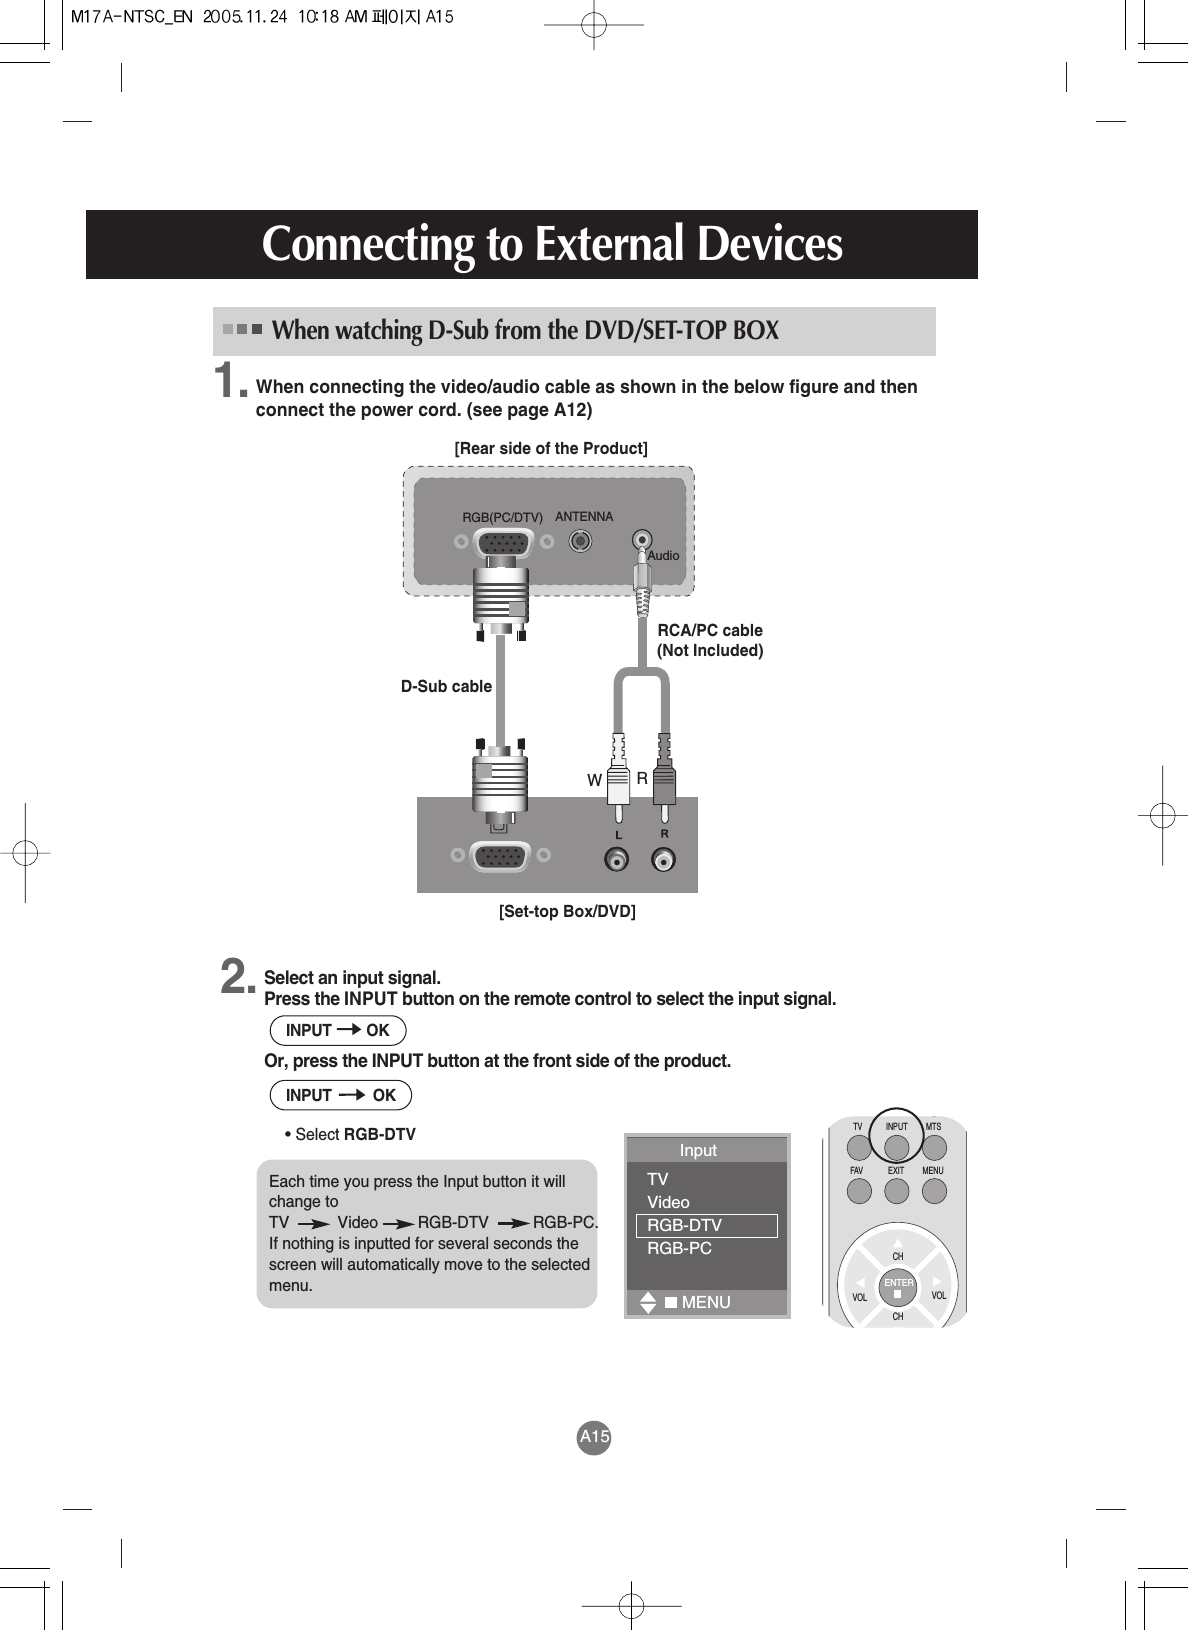 A15Connecting to External DevicesWhen connecting the video/audio cable as shown in the below figure and thenconnect the power cord. (see page A12)AudioANTENNARGB(PC/DTV)[Rear side of the Product][Set-top Box/DVD]D-Sub cableRCA/PC cable(Not Included)When watching D-Sub from the DVD/SET-TOP BOXWRSelect an input signal.Press the INPUT button on the remote control to select the input signal. Or, press the INPUT button at the front side of the product.• Select RGB-DTV2.1.INPUT OKINPUT OKCHTV MTSINPUTFAV MENUEXITCHVOL VOLENTEREach time you press the Input button it willchange to TV           Video         RGB-DTV          RGB-PC.If nothing is inputted for several seconds thescreen will automatically move to the selectedmenu. Input TVVideoRGB-DTVRGB-PCMENU